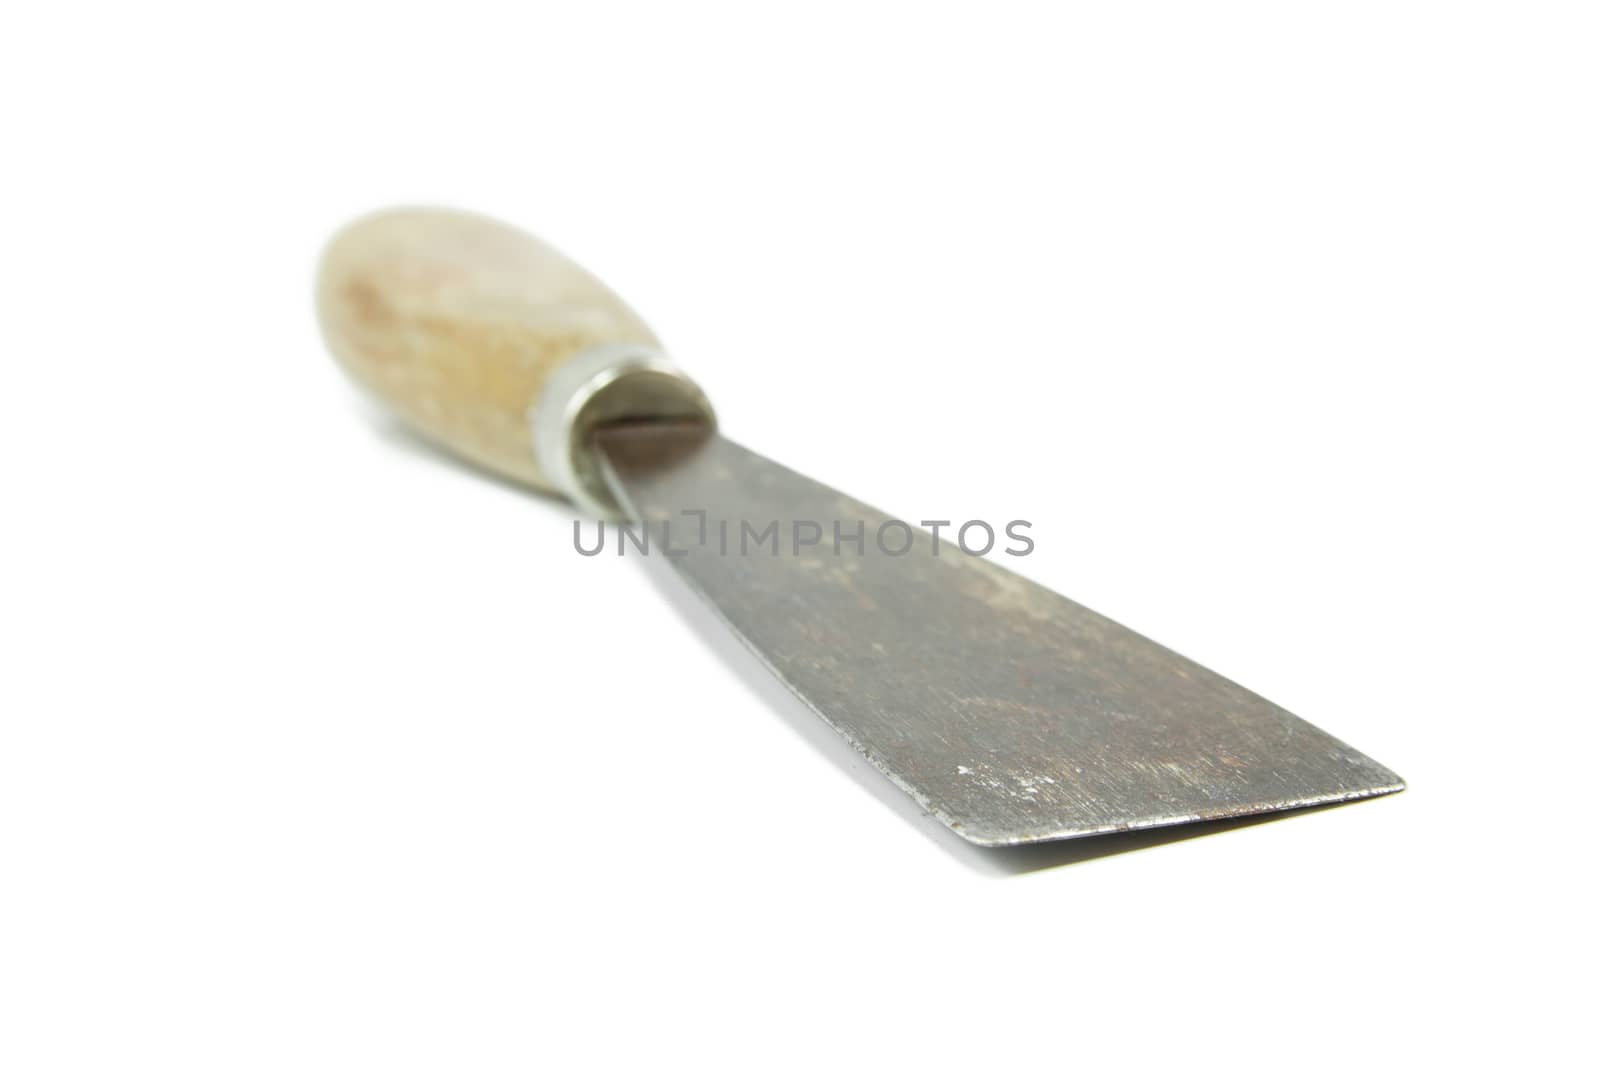 Trowel isolated on white background, shallow depth of field by kasinv